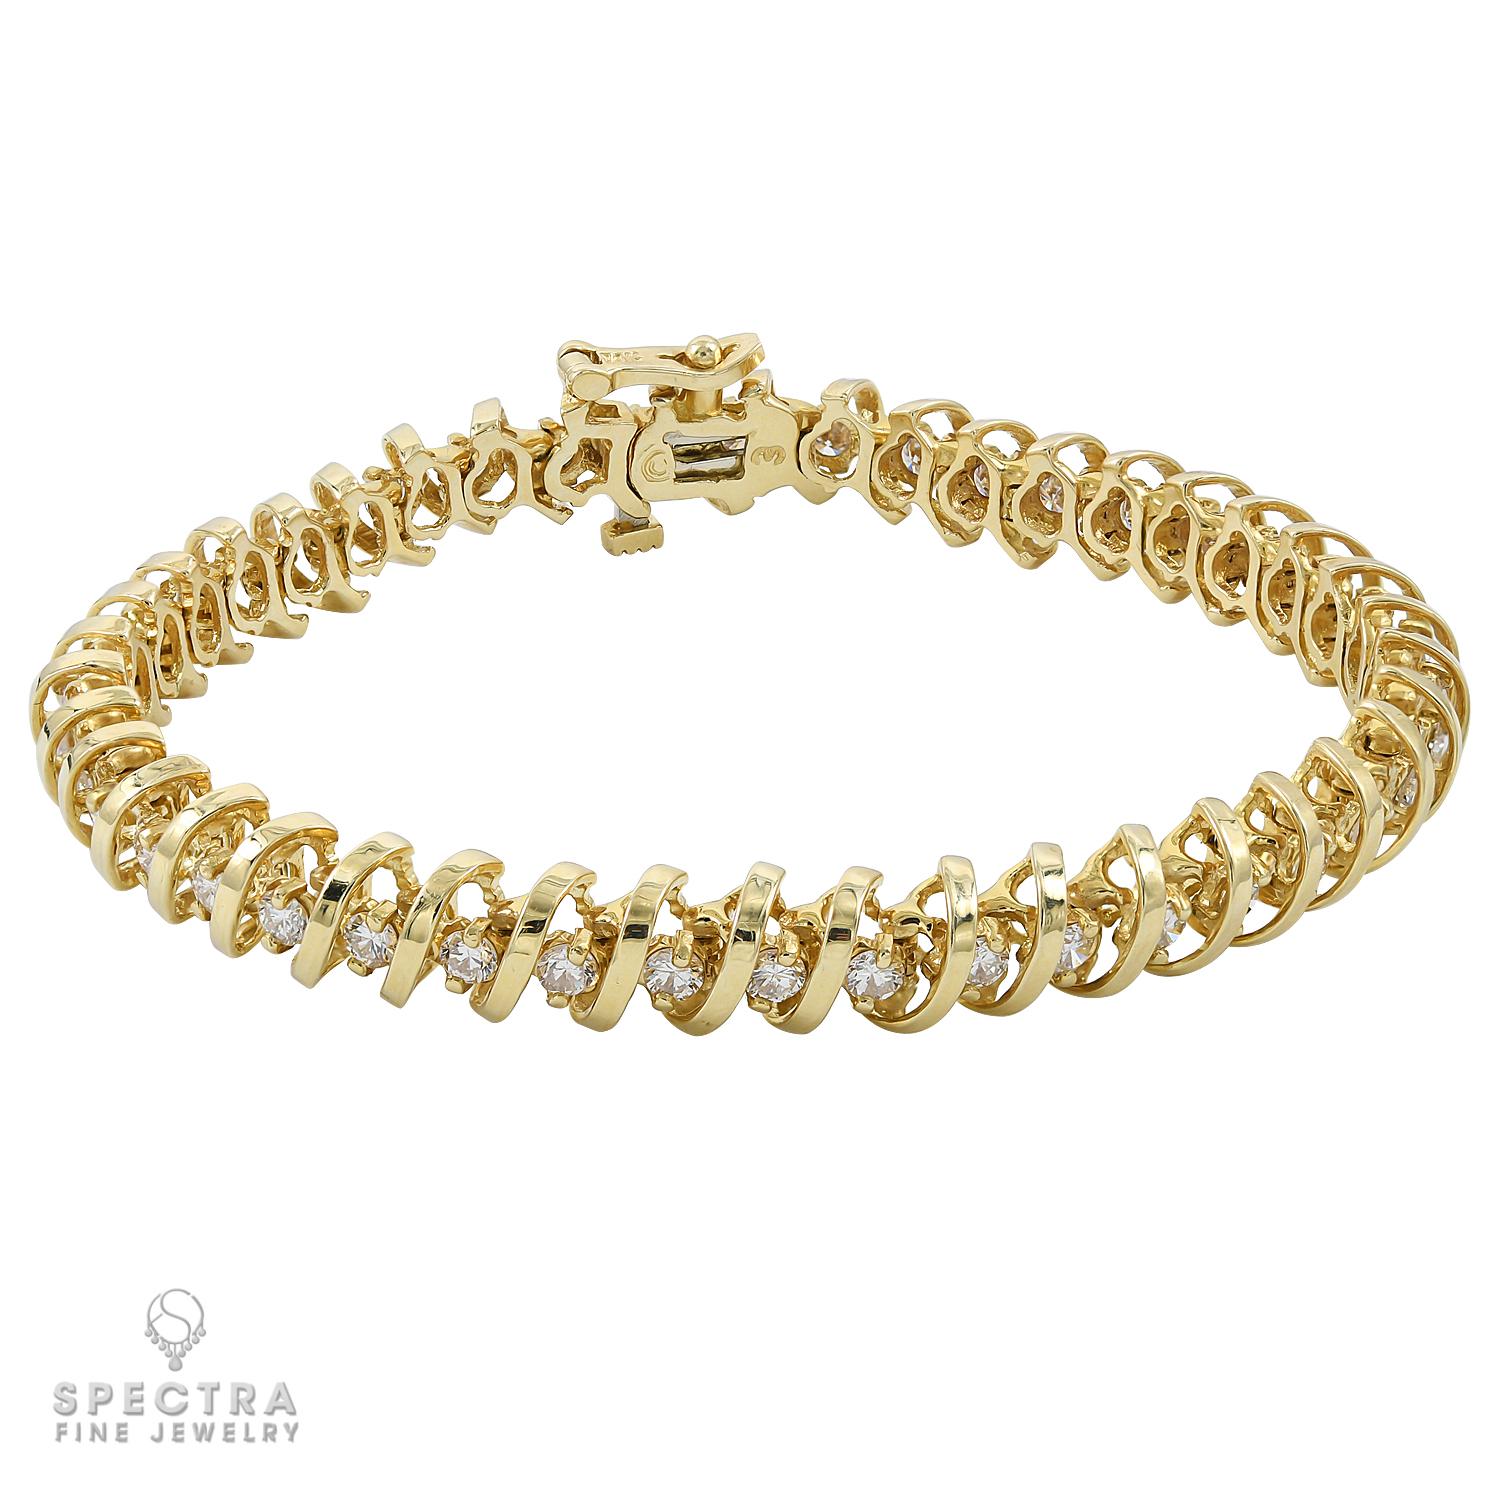 A classy bracelet comprising of 42 diamonds weighing a total of 3.78 carats, each diamond is approximately 0.09 carat. Diamonds are all natural with H-I color, VS-SI clarity. Coil design, 14kt yellow gold.
The bracelet is 7 inches long.
Gross weight